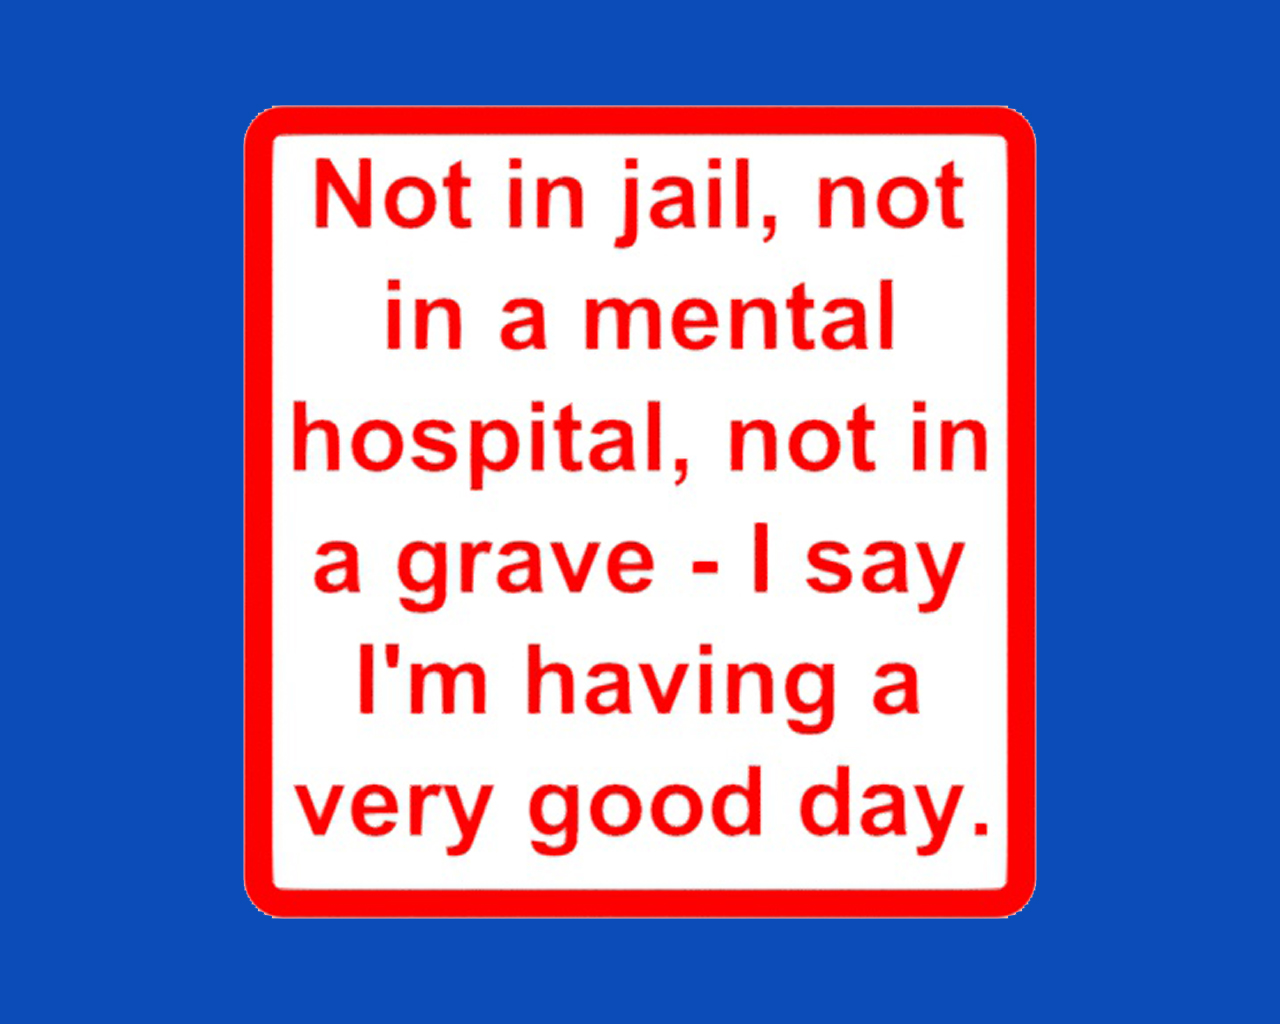 Not in jail, not in a mental hospital, not in a grave..., sign